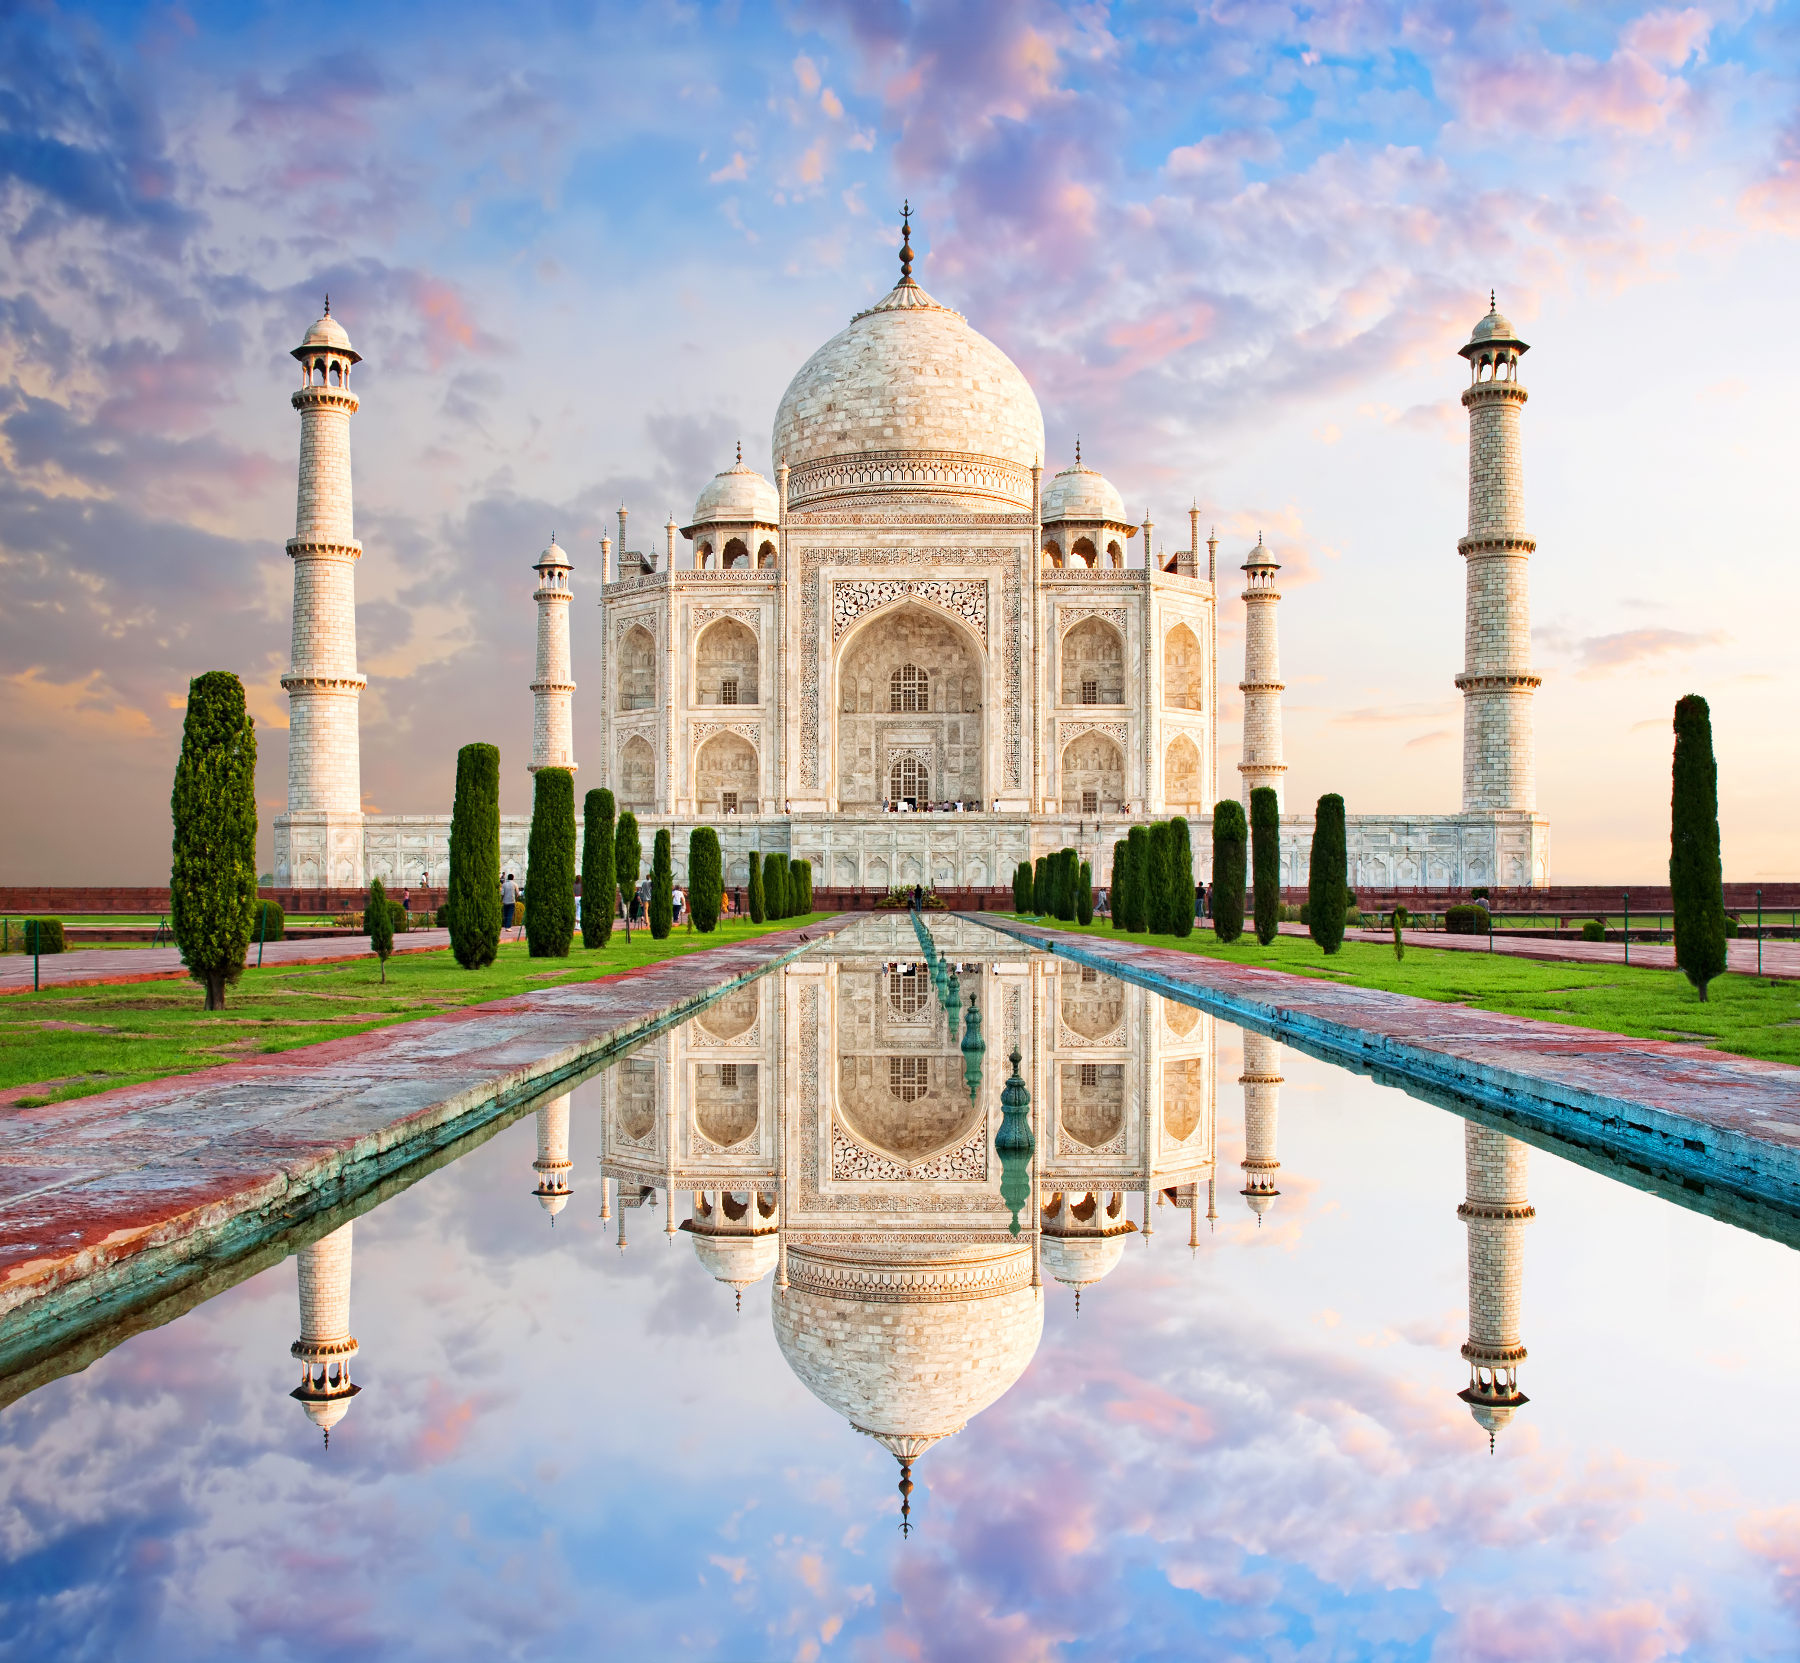 Taj Mahal might limit visitor numbers for safety and protection